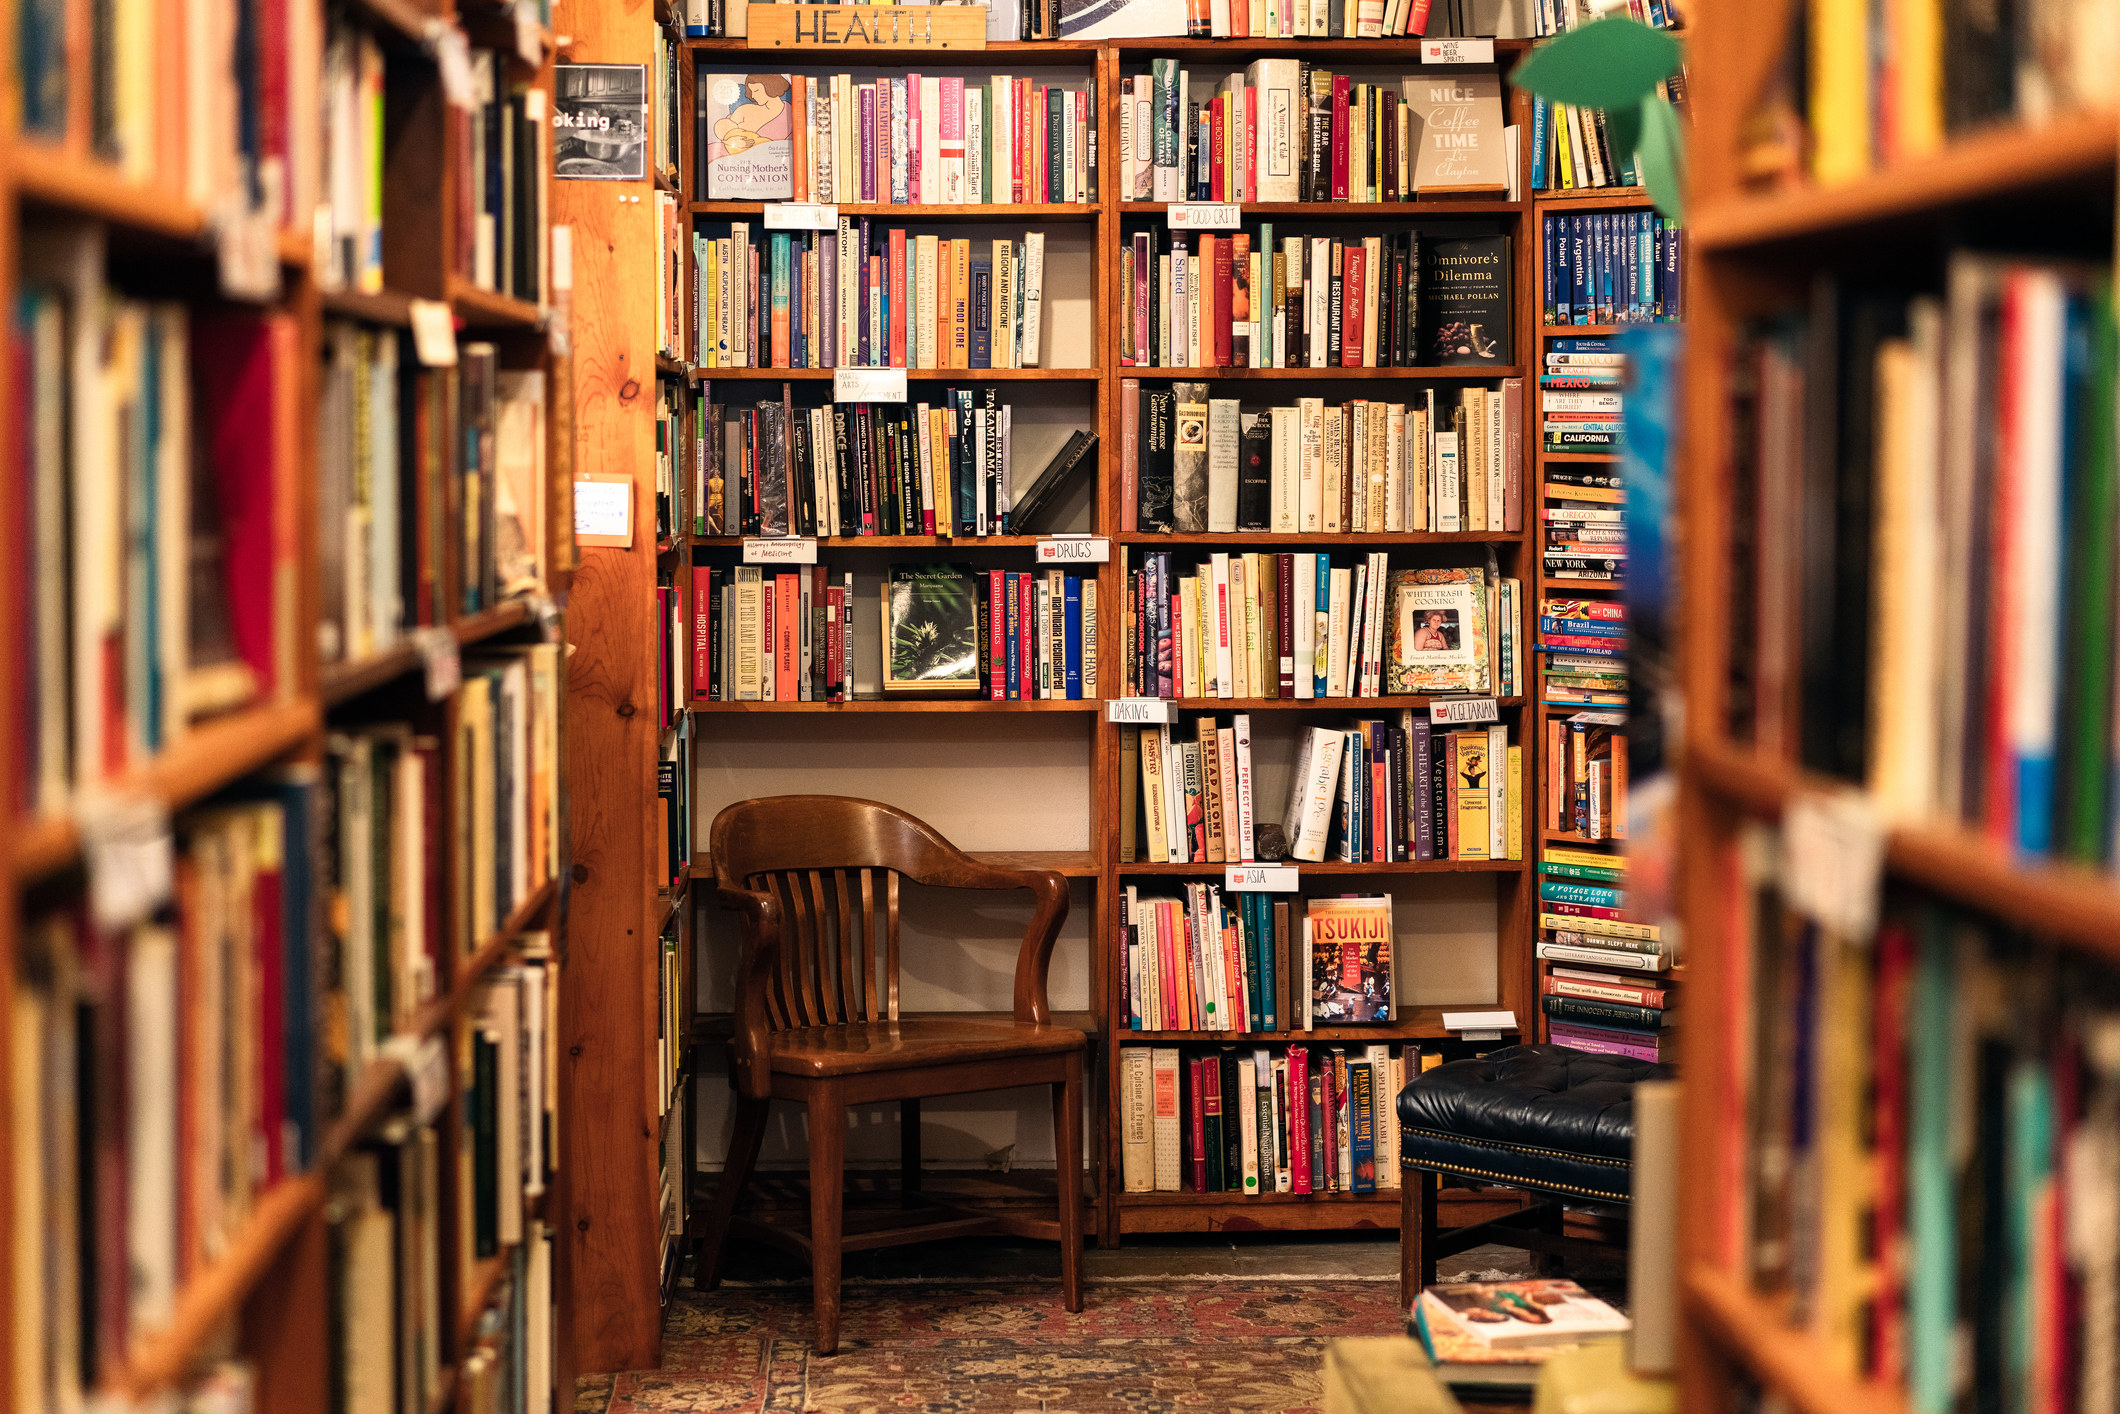 Bookshelves in a used bookstore